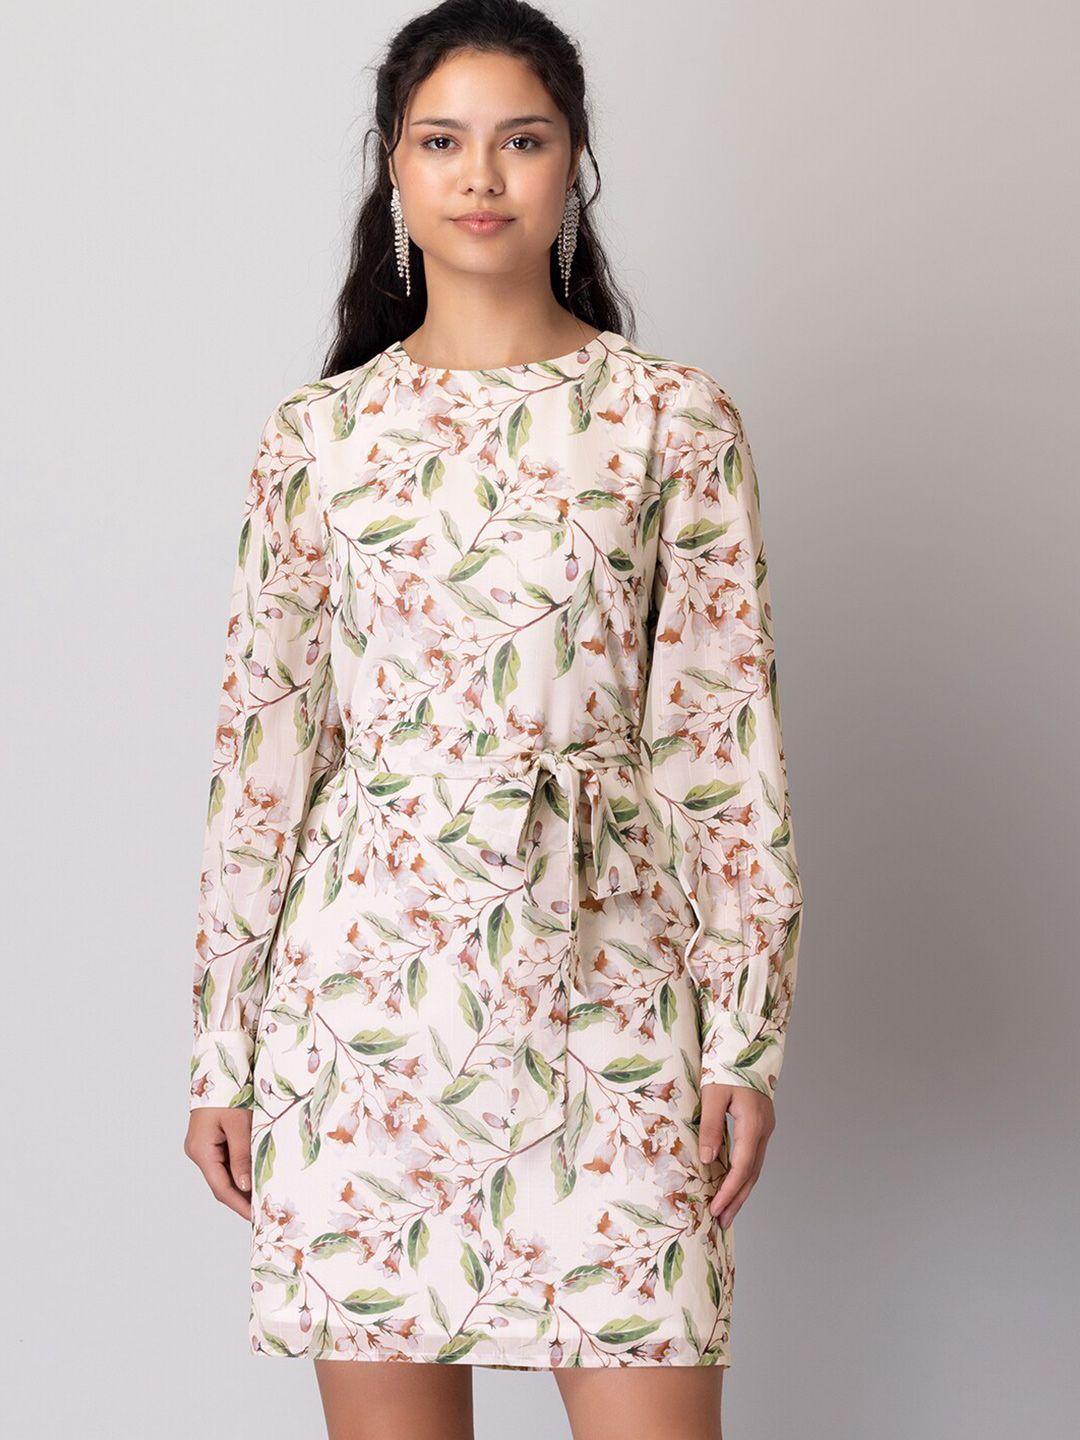 faballey white floral printed cuffed sleeves belted sheath dress